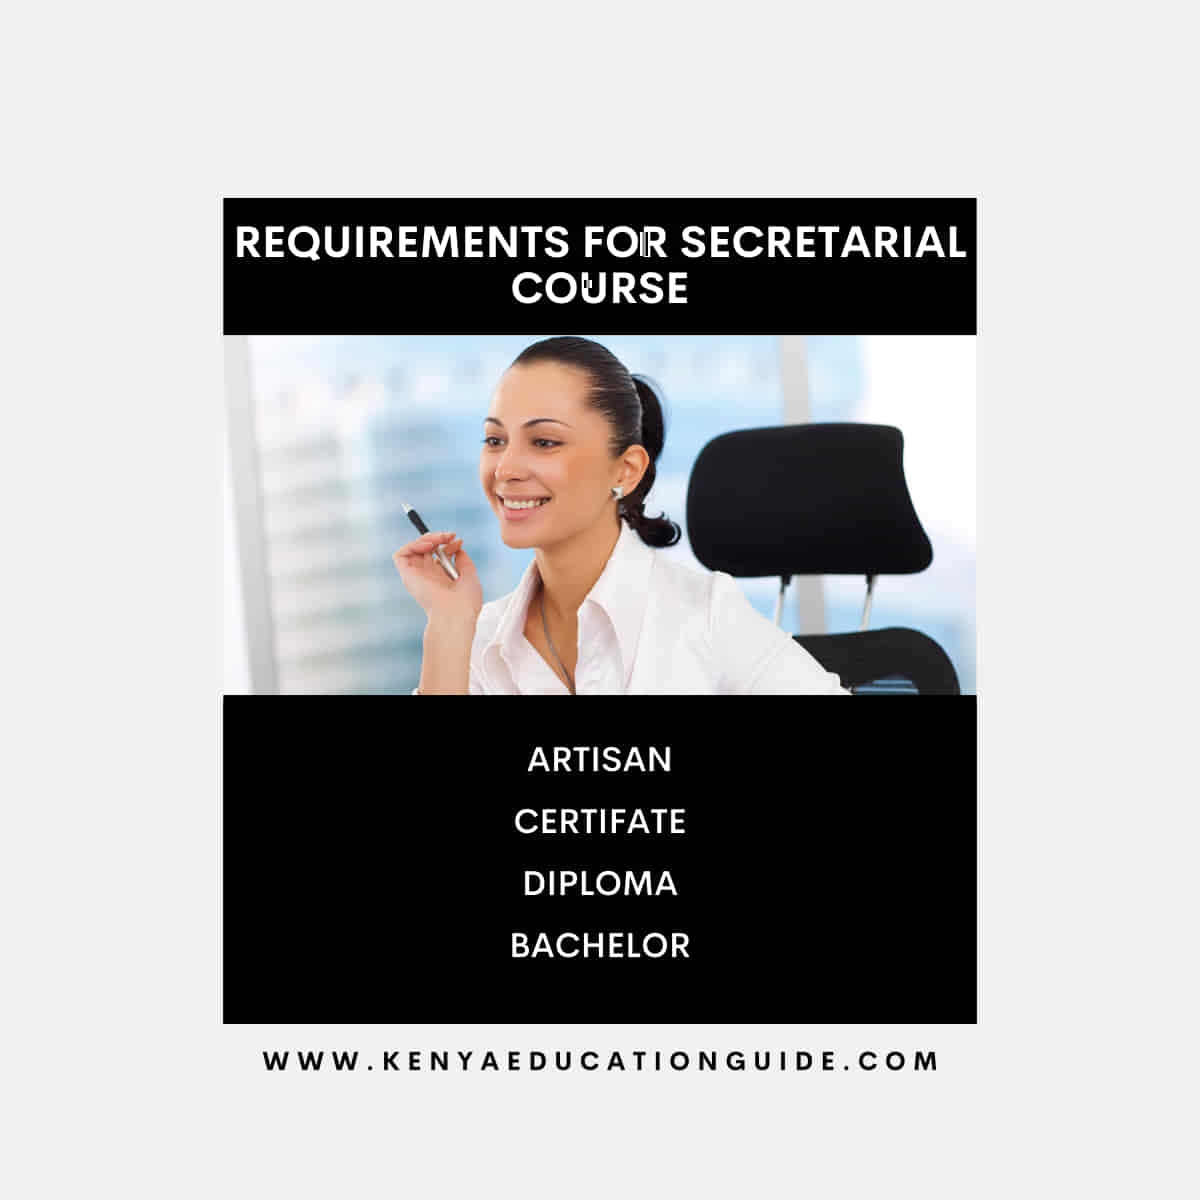 Requirements for secretarial course